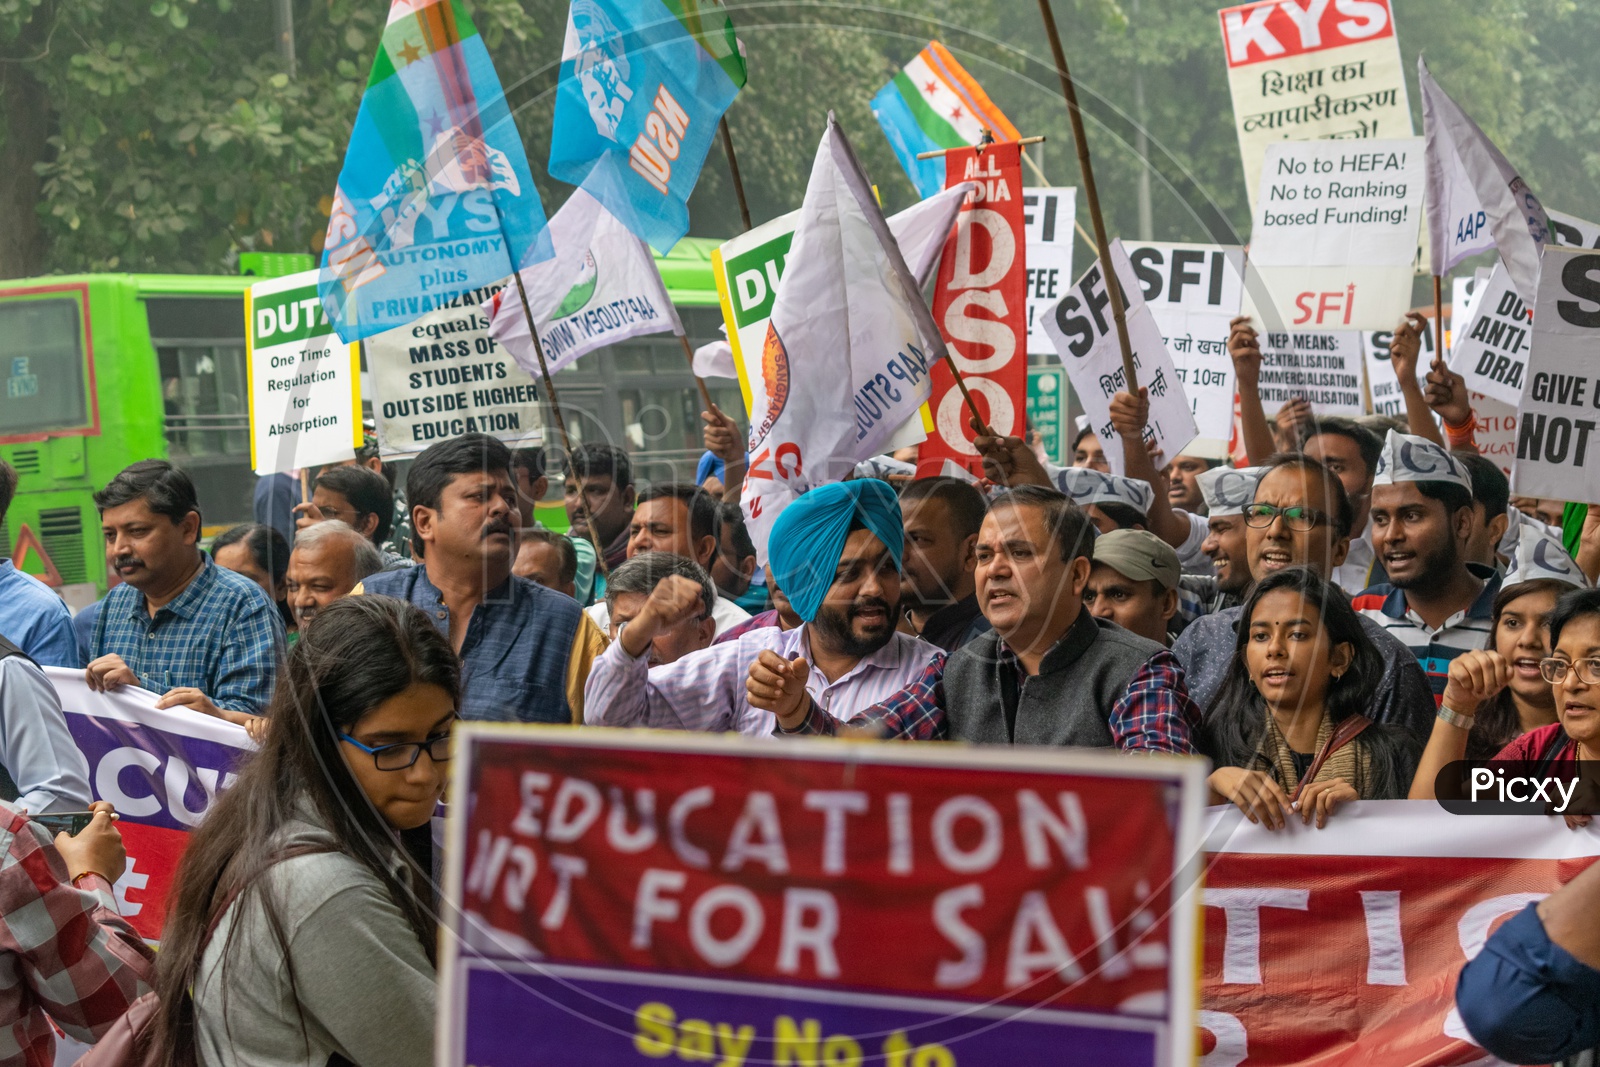 Students and teachers from different universities and different organisations protesting against fee hike, Draft National Education Policy 2019 and other issues related to education